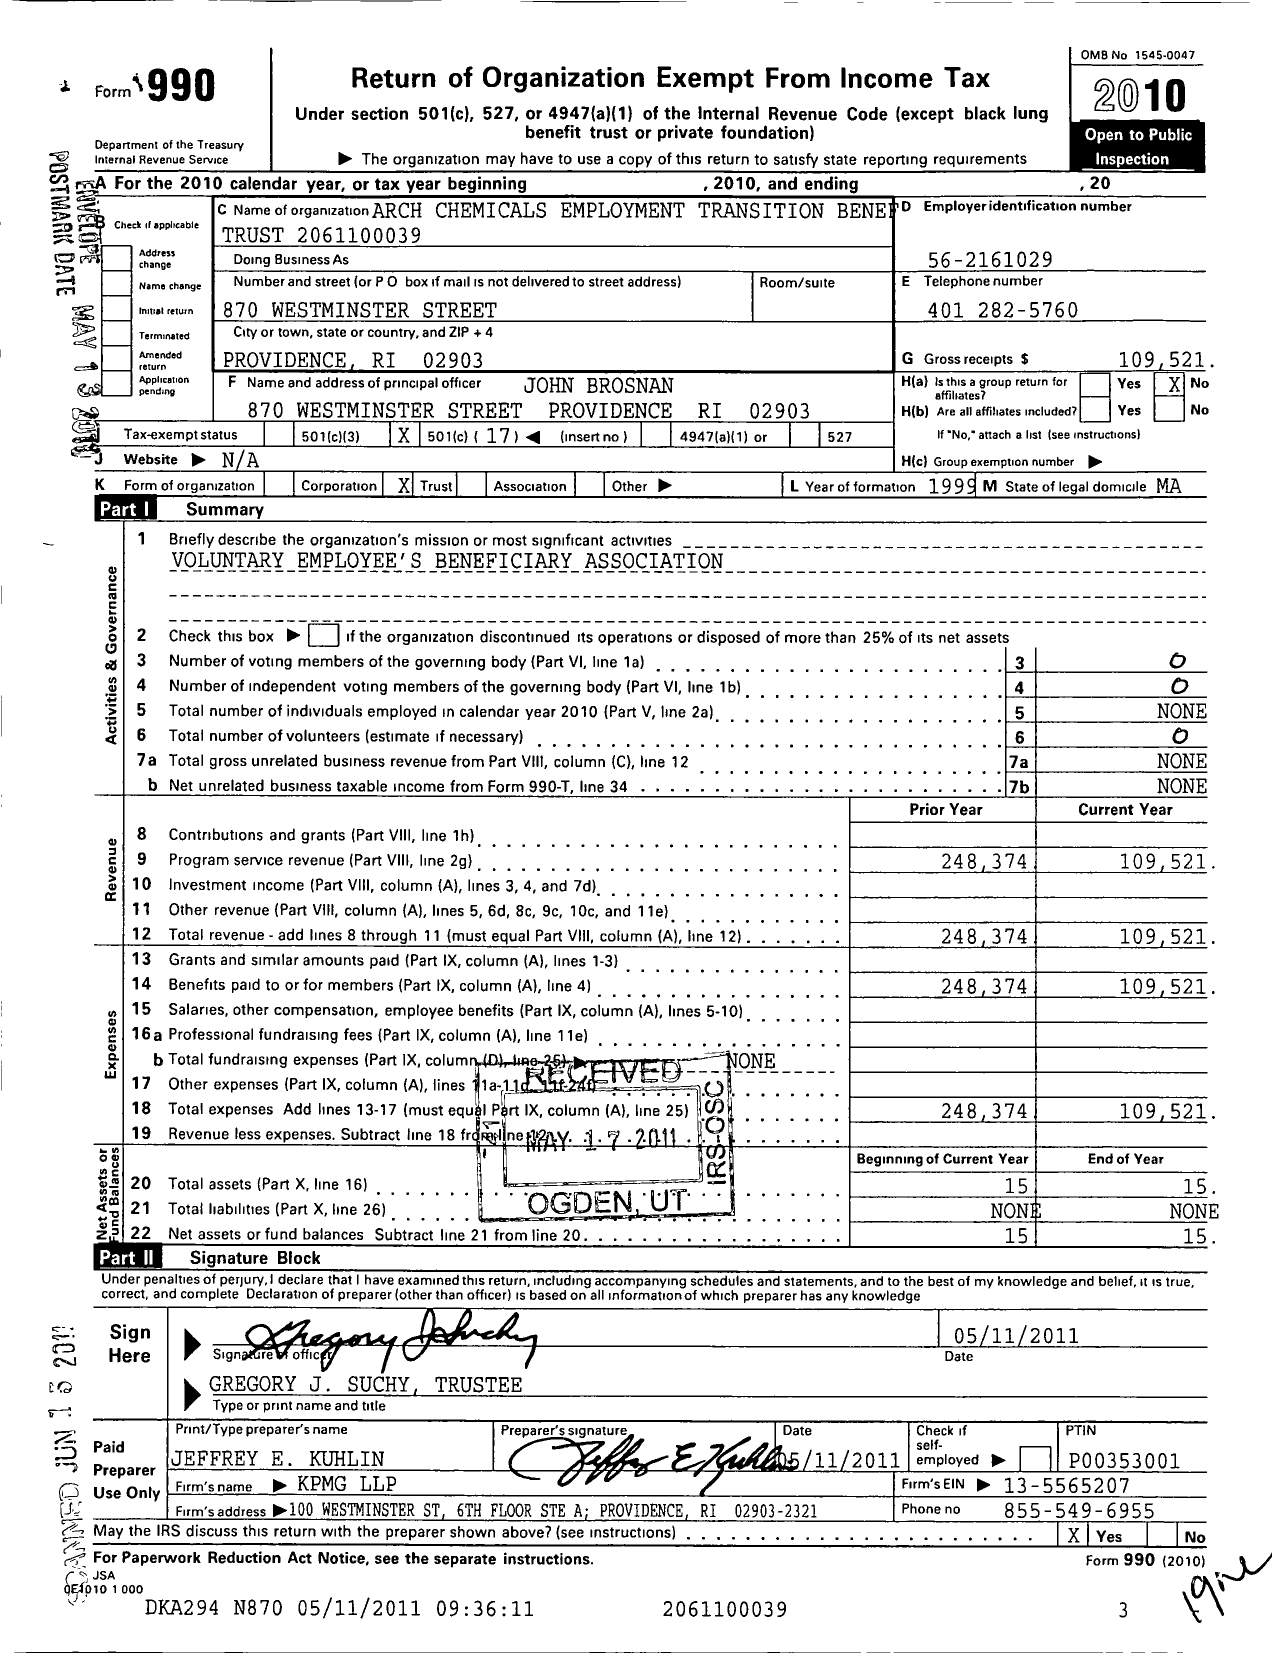 Image of first page of 2010 Form 990O for Arch Chemicals Employment Transition Benef